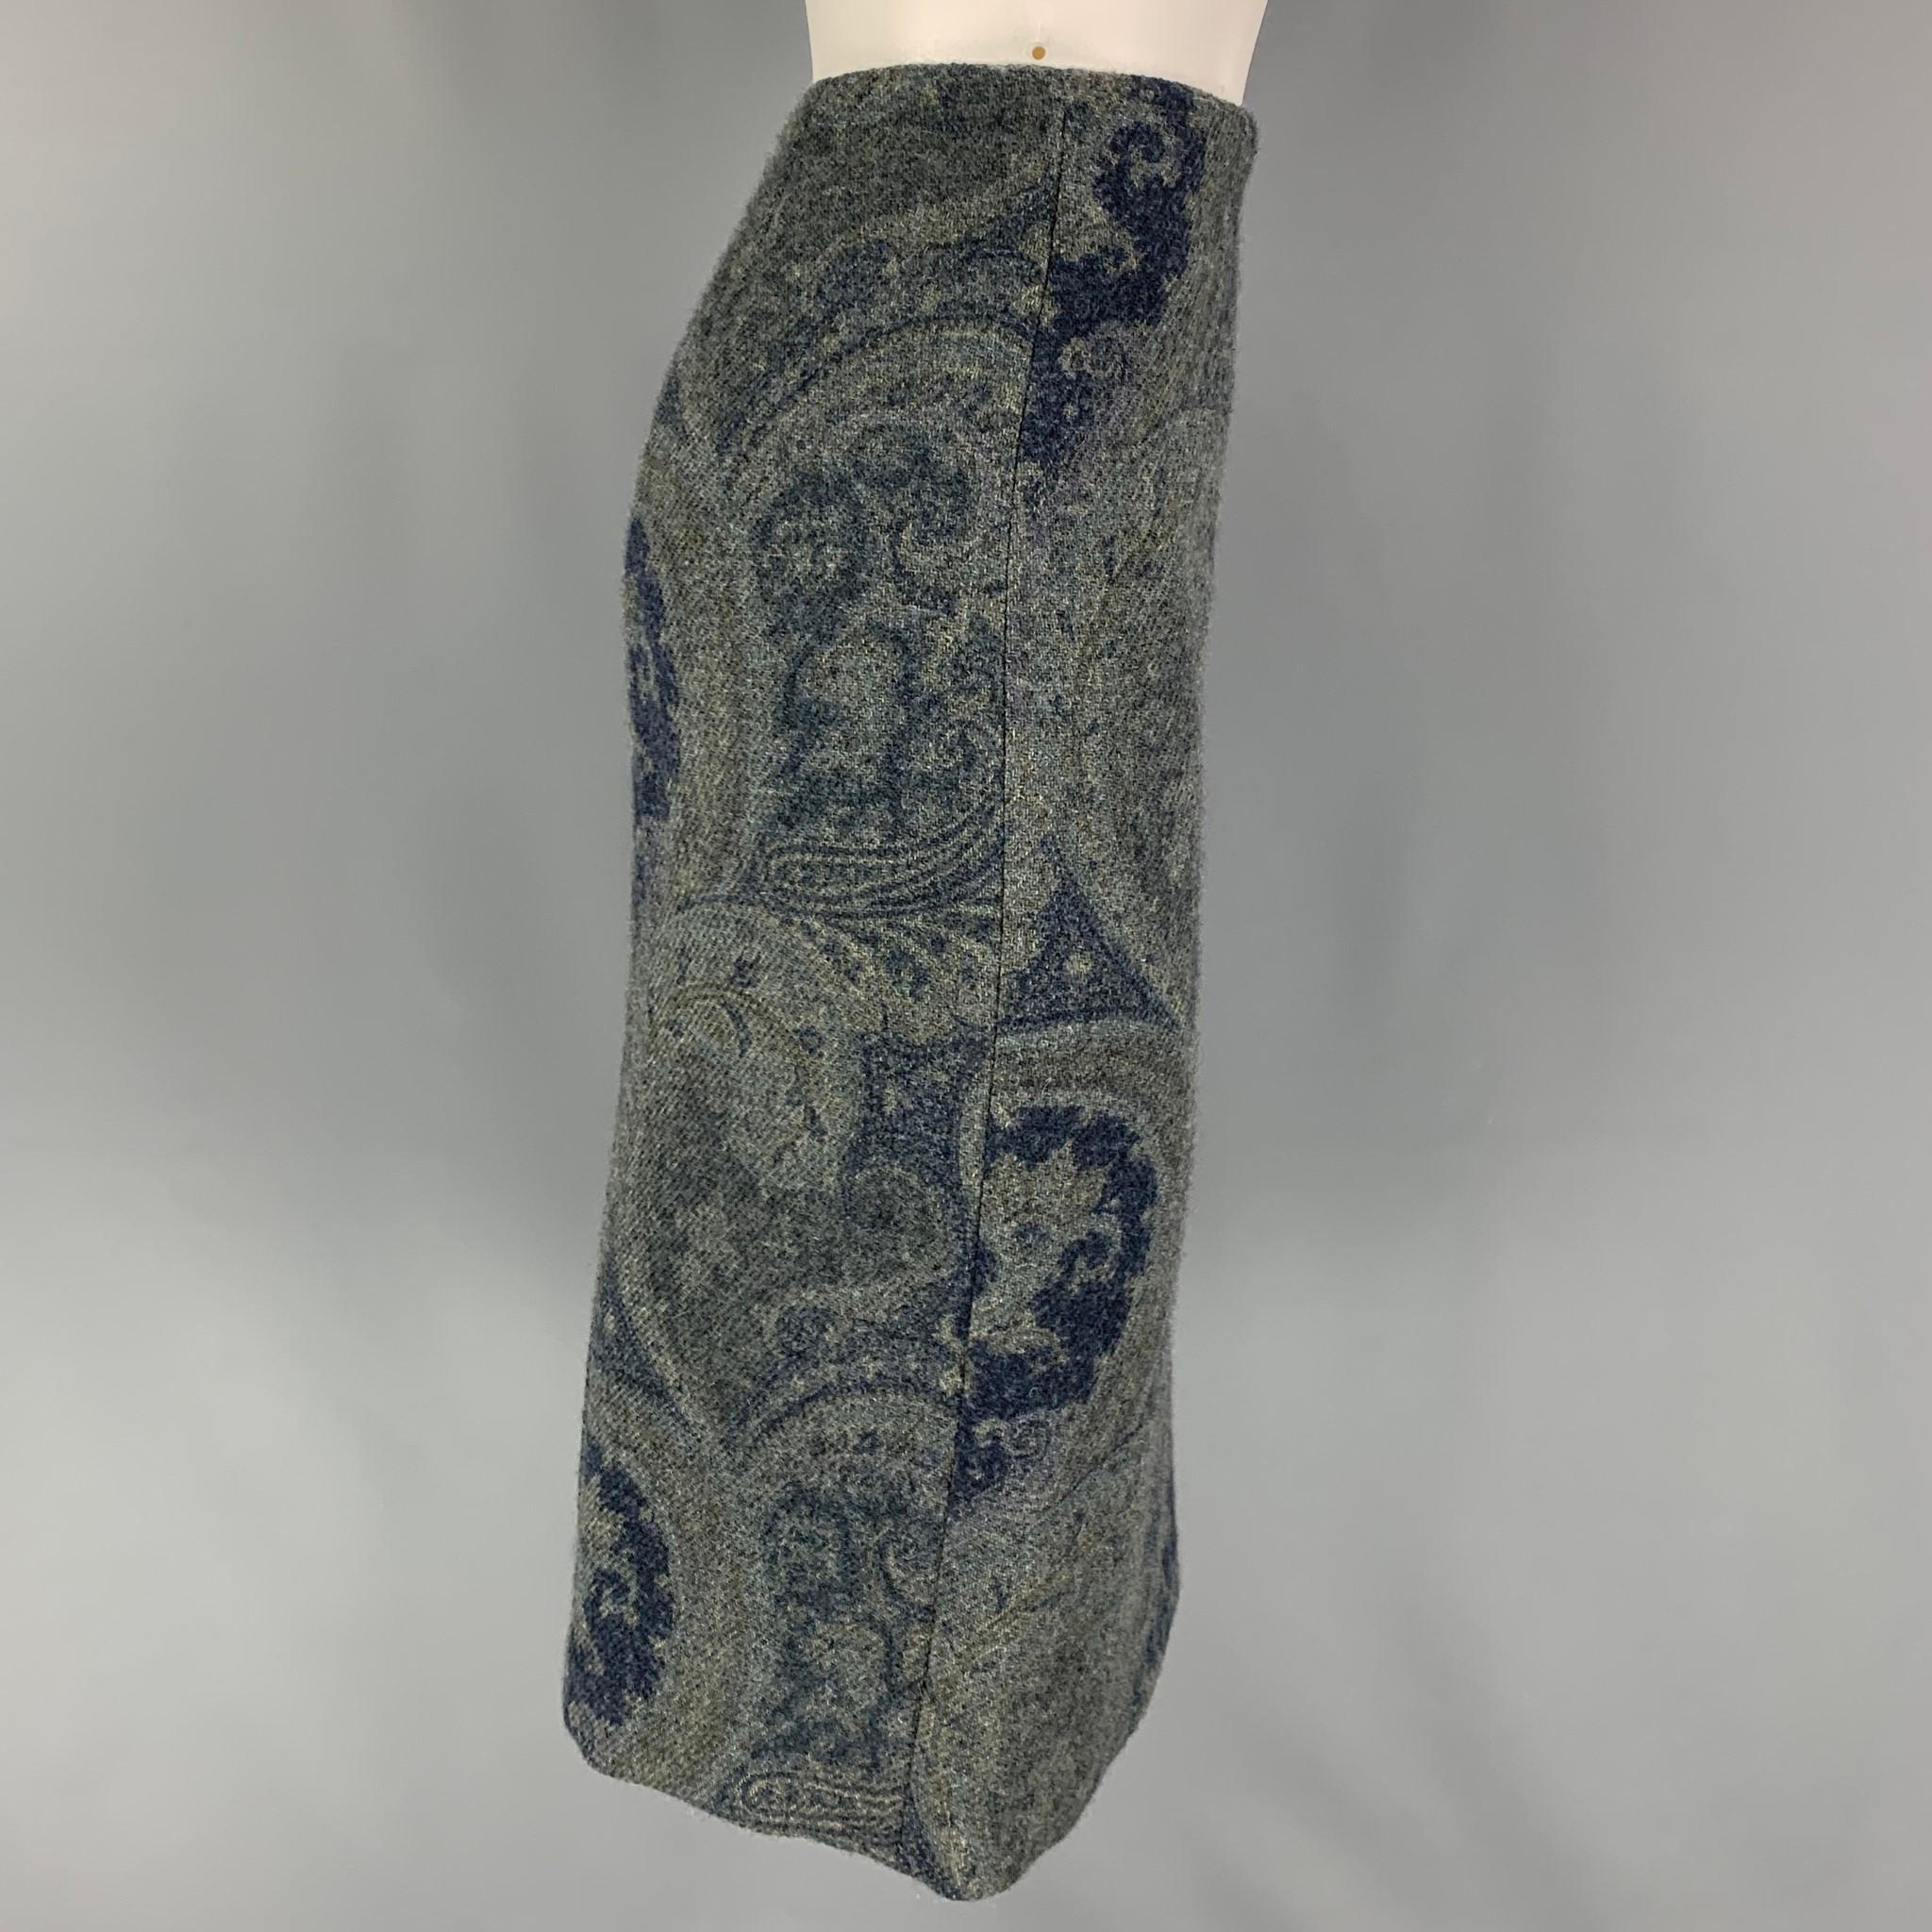 RALPH LAUREN 'Black Label' skirt comes in a grey & blue paisley wool with a slip liner featuring a pencil style, back slit, and aside zipper closure. Made in USA.

Very Good Pre-Owned Condition.
Marked: 4

Measurements:

Waist: 30 in.
Hip: 36